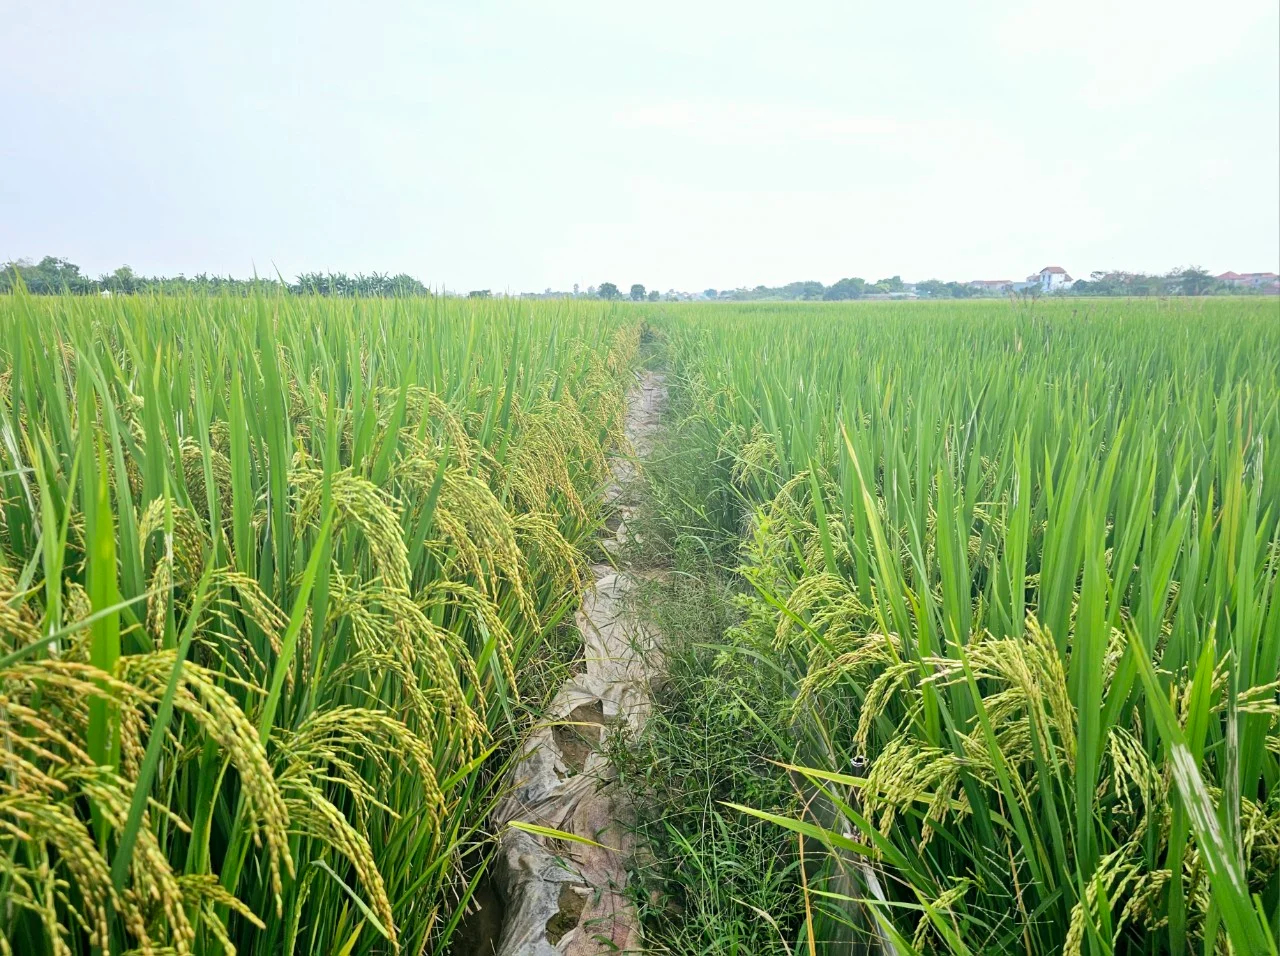 DT 39 rice cultivated using organic processes (left) outperforms traditionally cultivated rice (right). Photo: Hoang Anh.